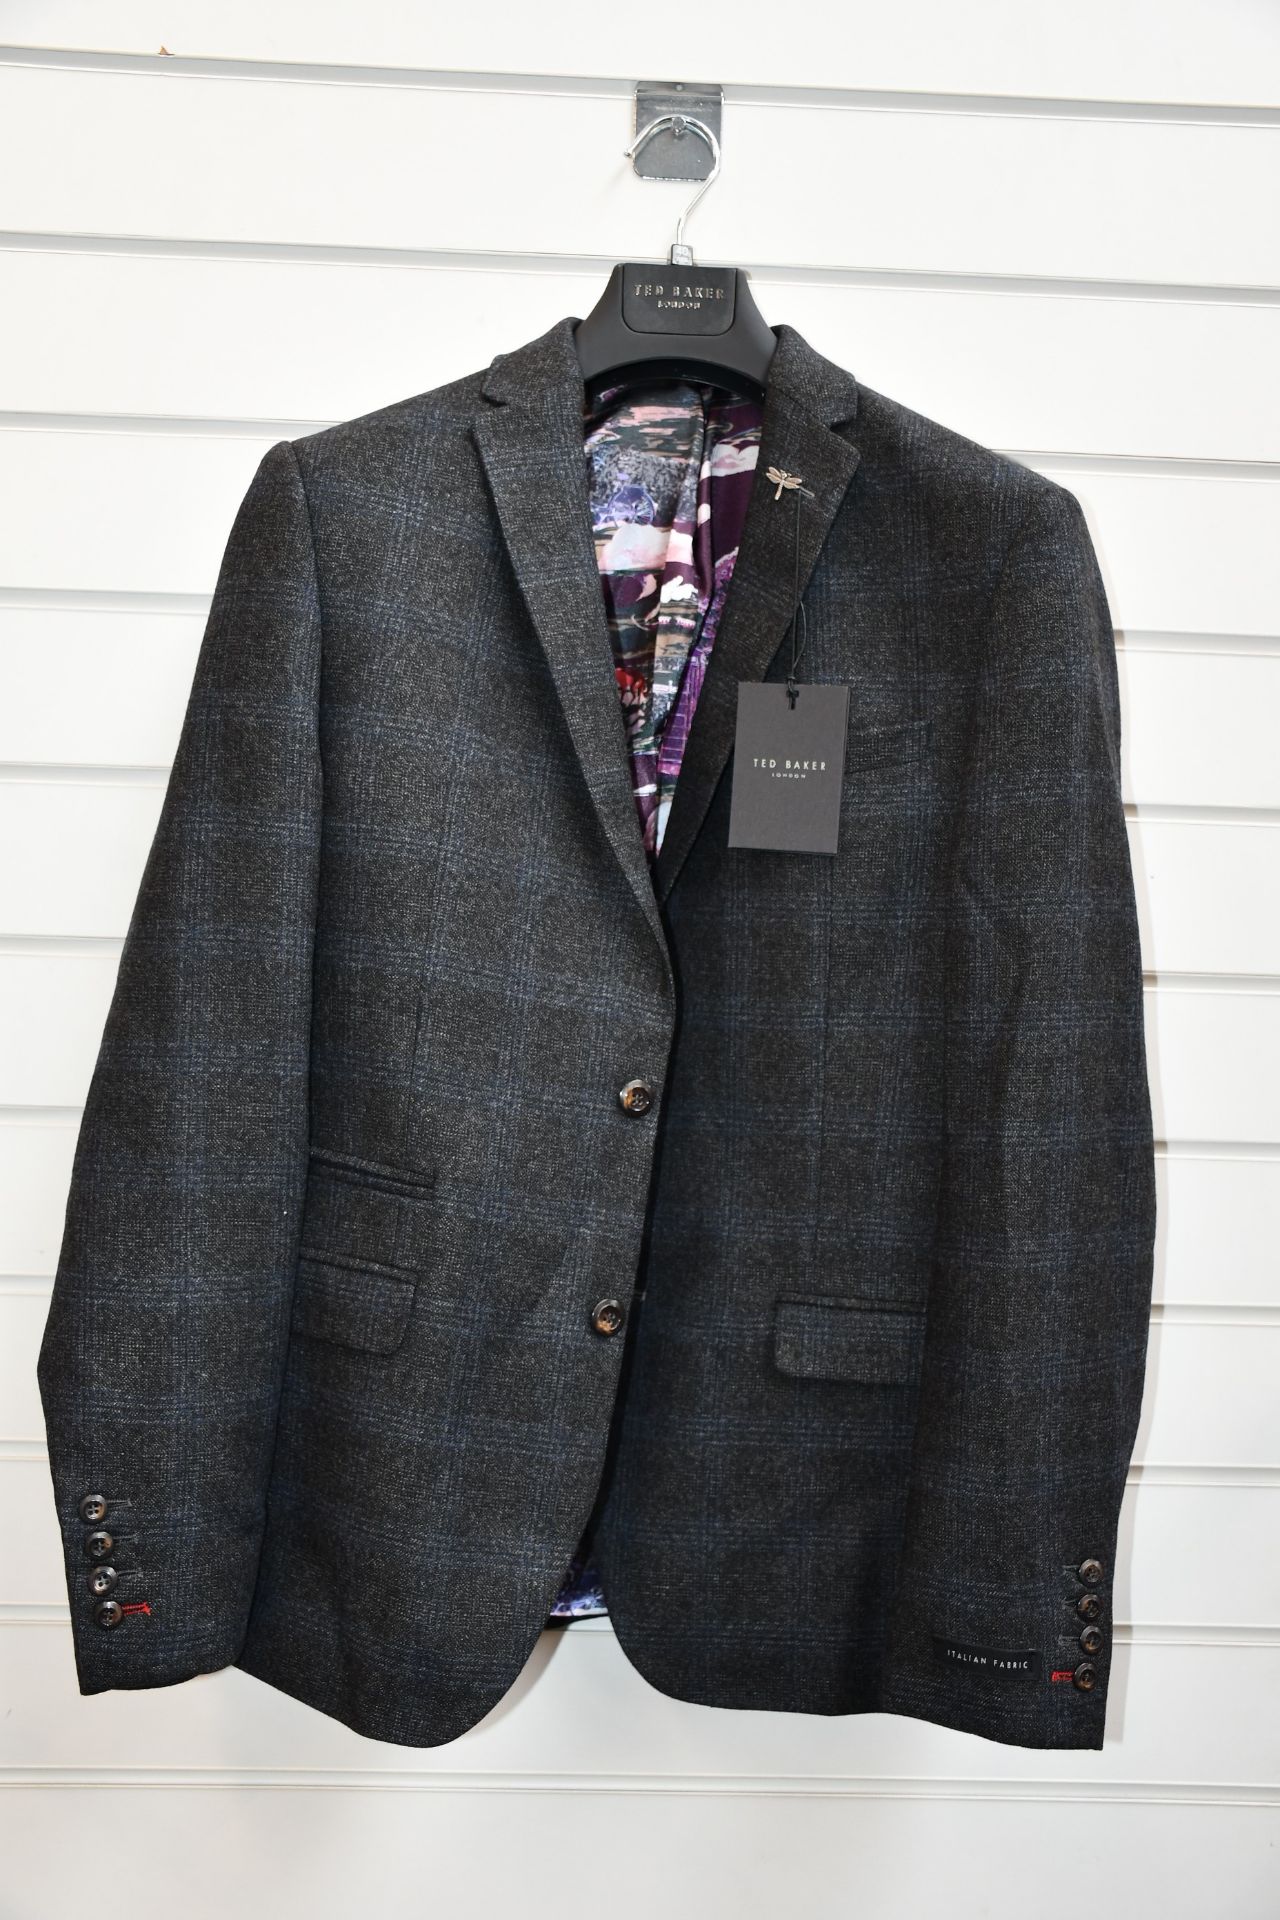 An as new Ted Baker charcoal check suit jacket (40 Reg - RRP £153).